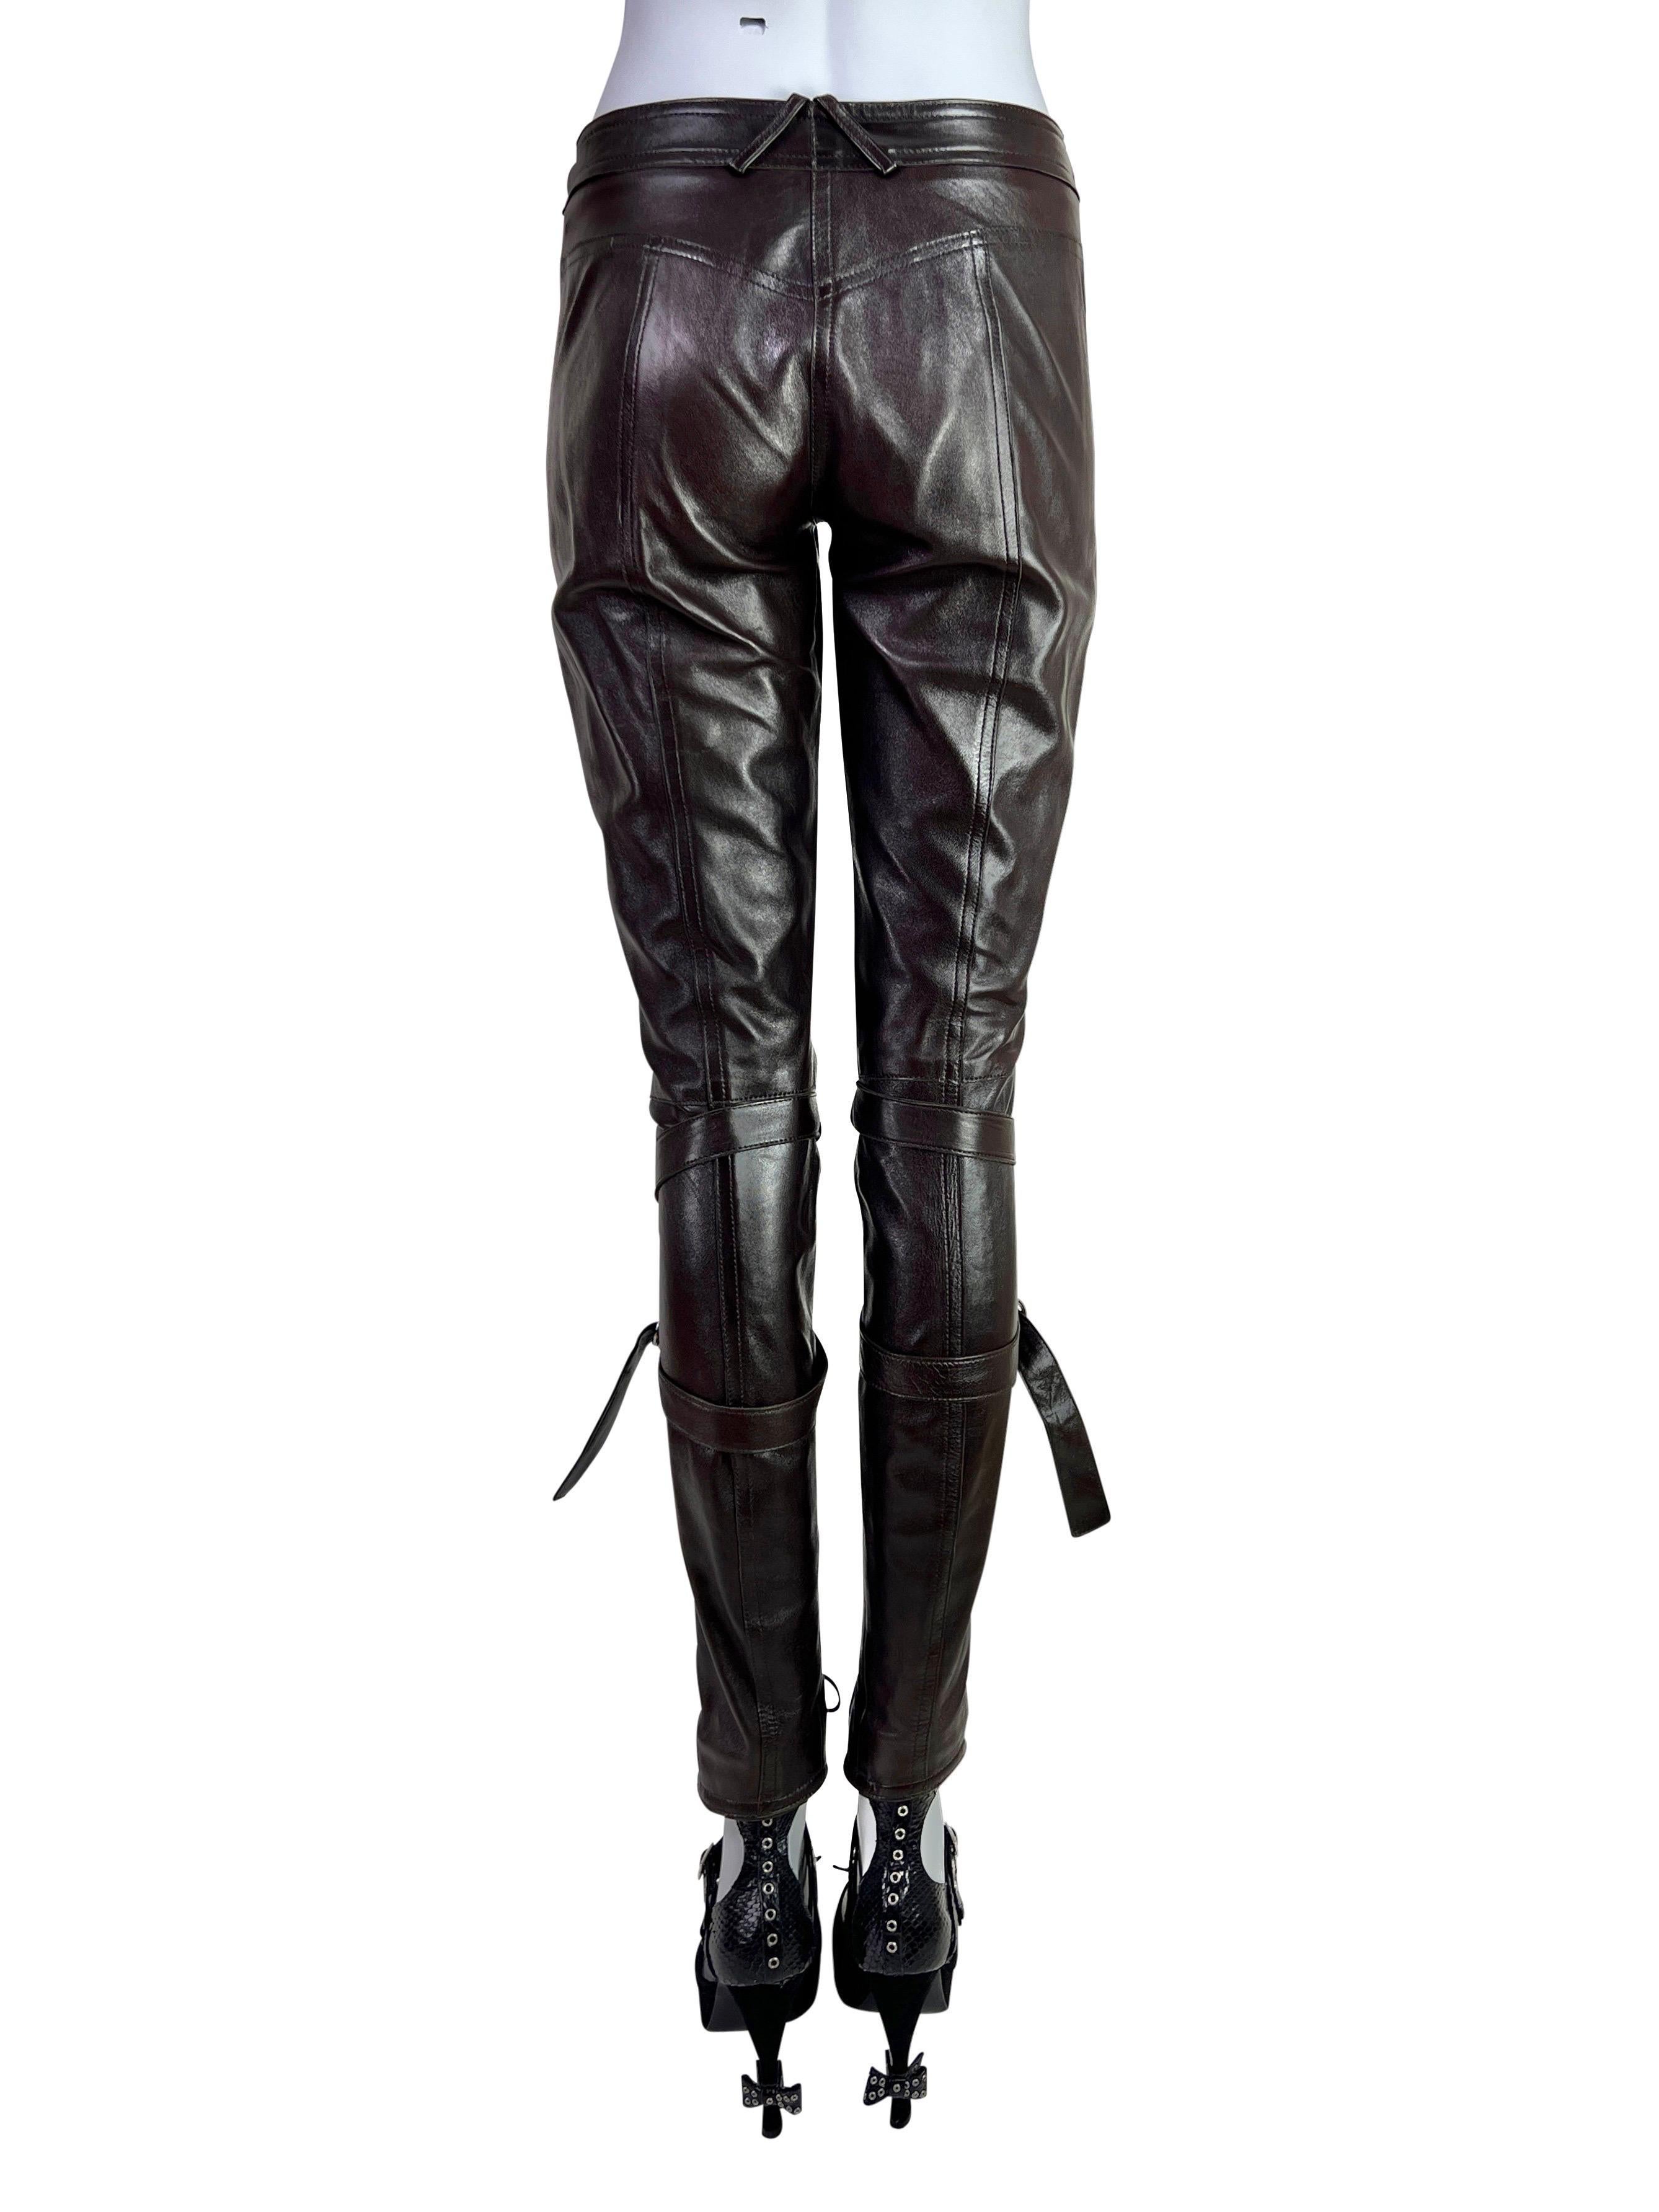 Dior by John Galliano Fall 2003 Leather Lace-Up Pants in Dark Chocolate For Sale 3